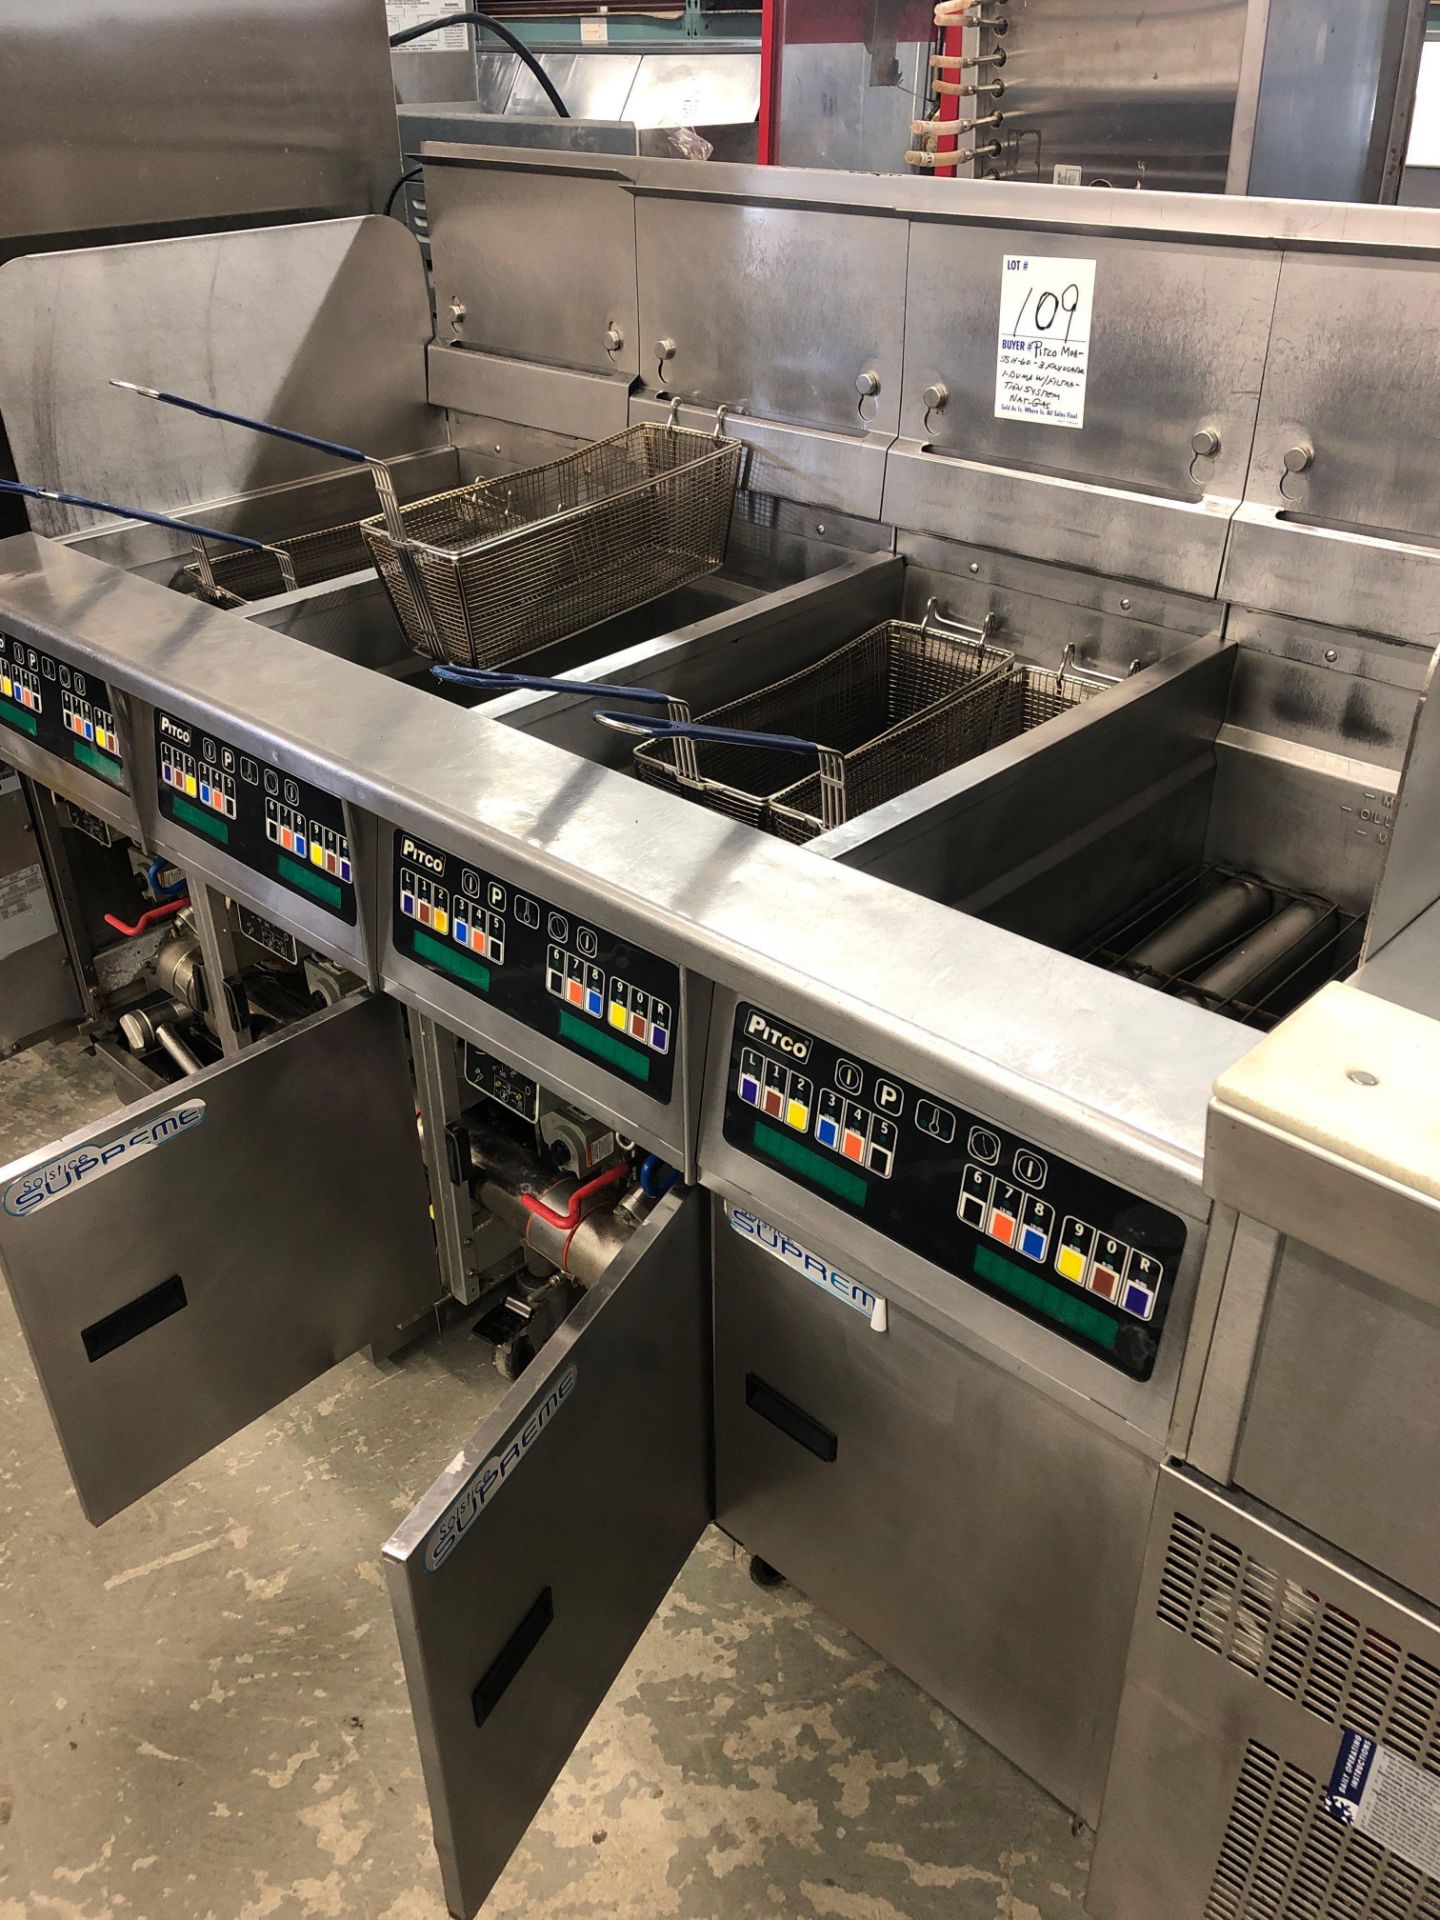 Pitco 4 section fryer with filtration system - Image 4 of 4